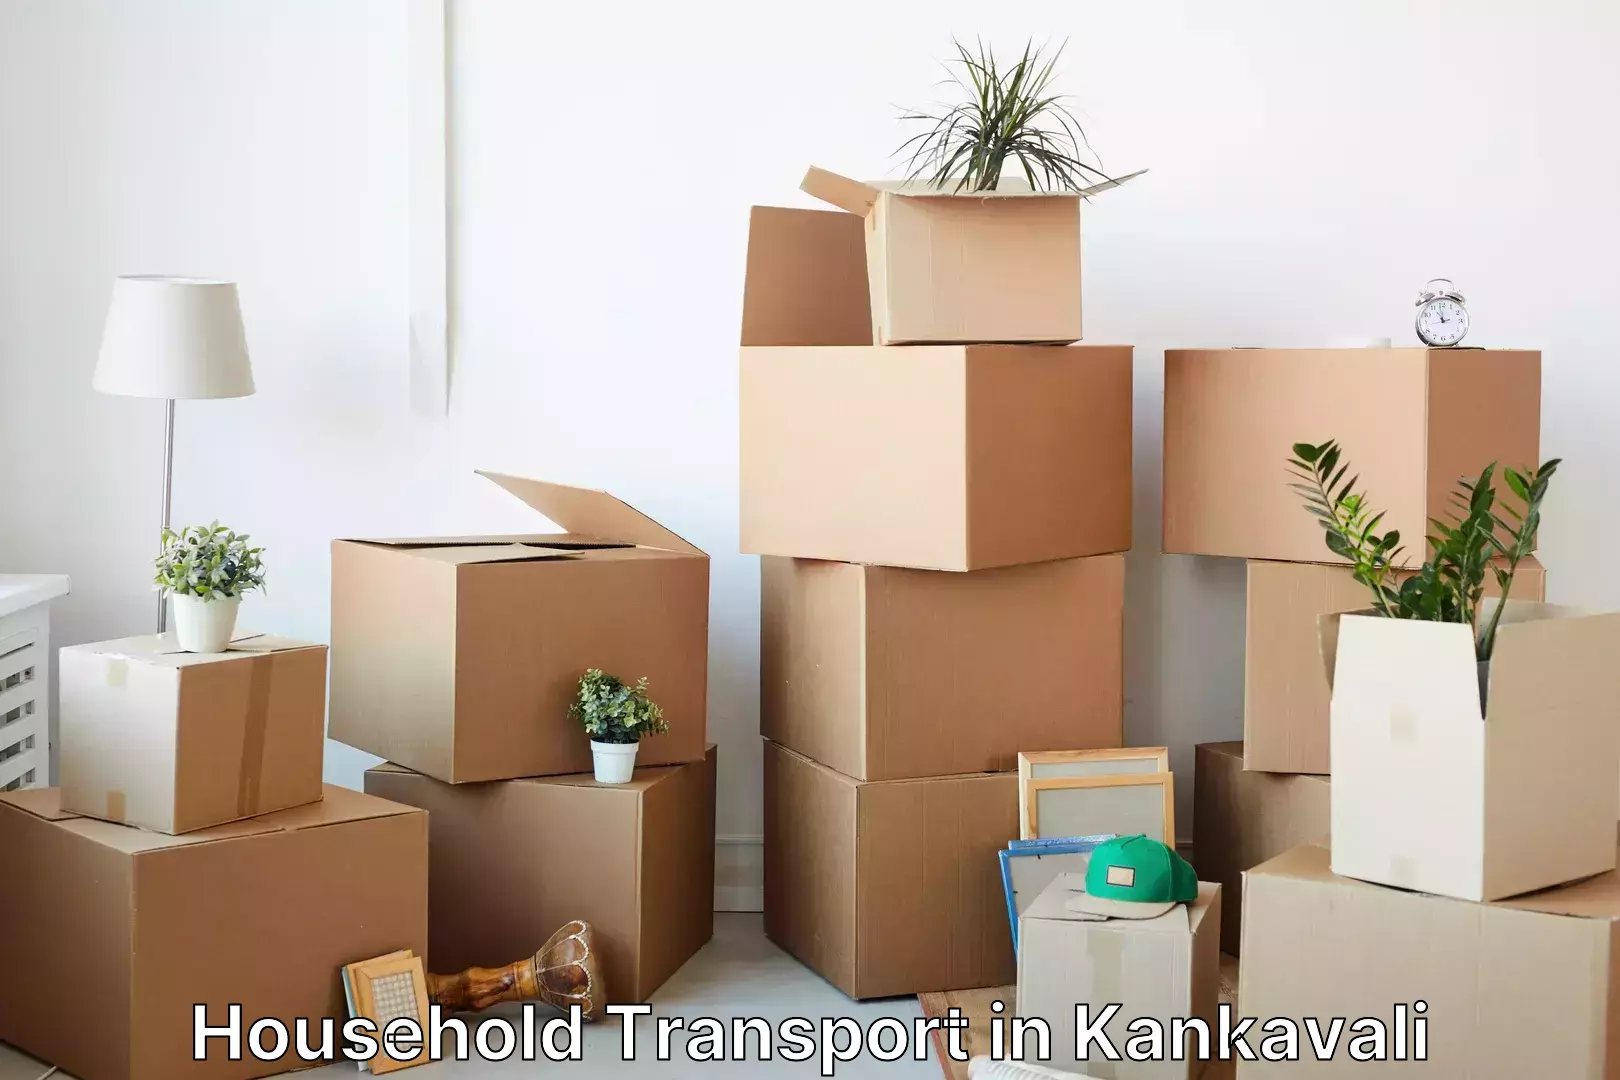 Professional moving assistance in Kankavali